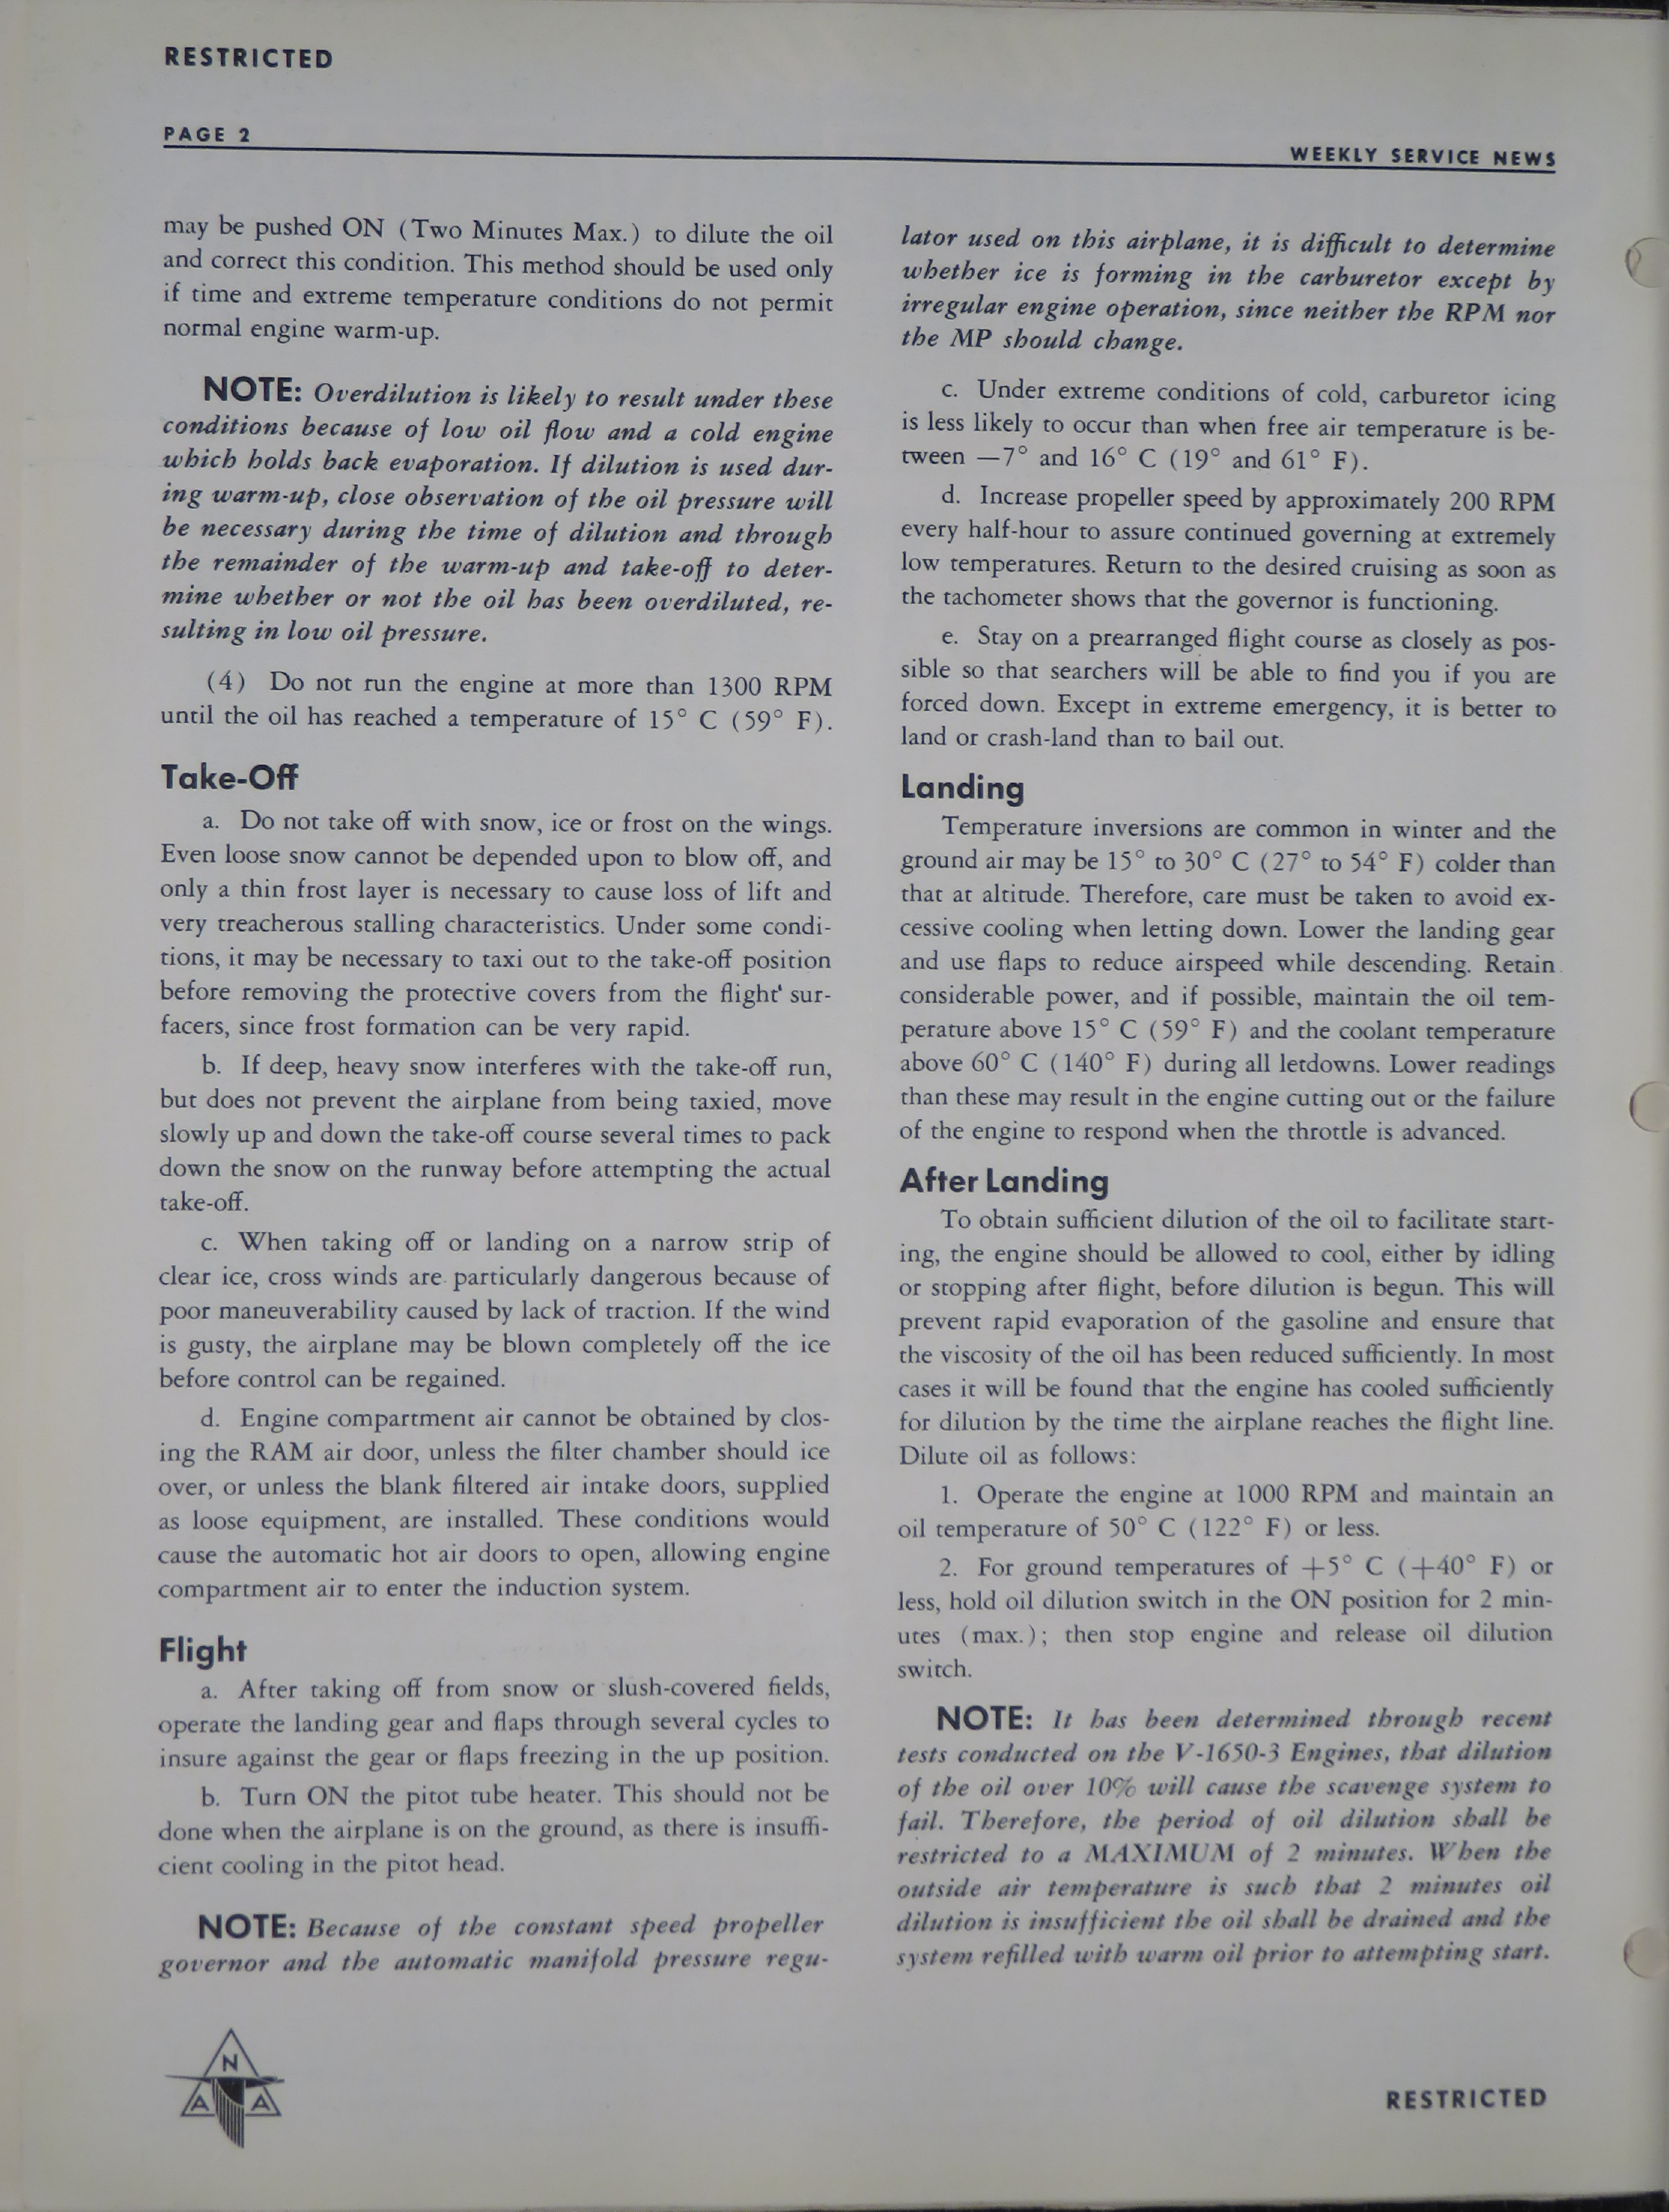 Sample page 2 from AirCorps Library document: Volume 2, No. 12 - Weekly Service News